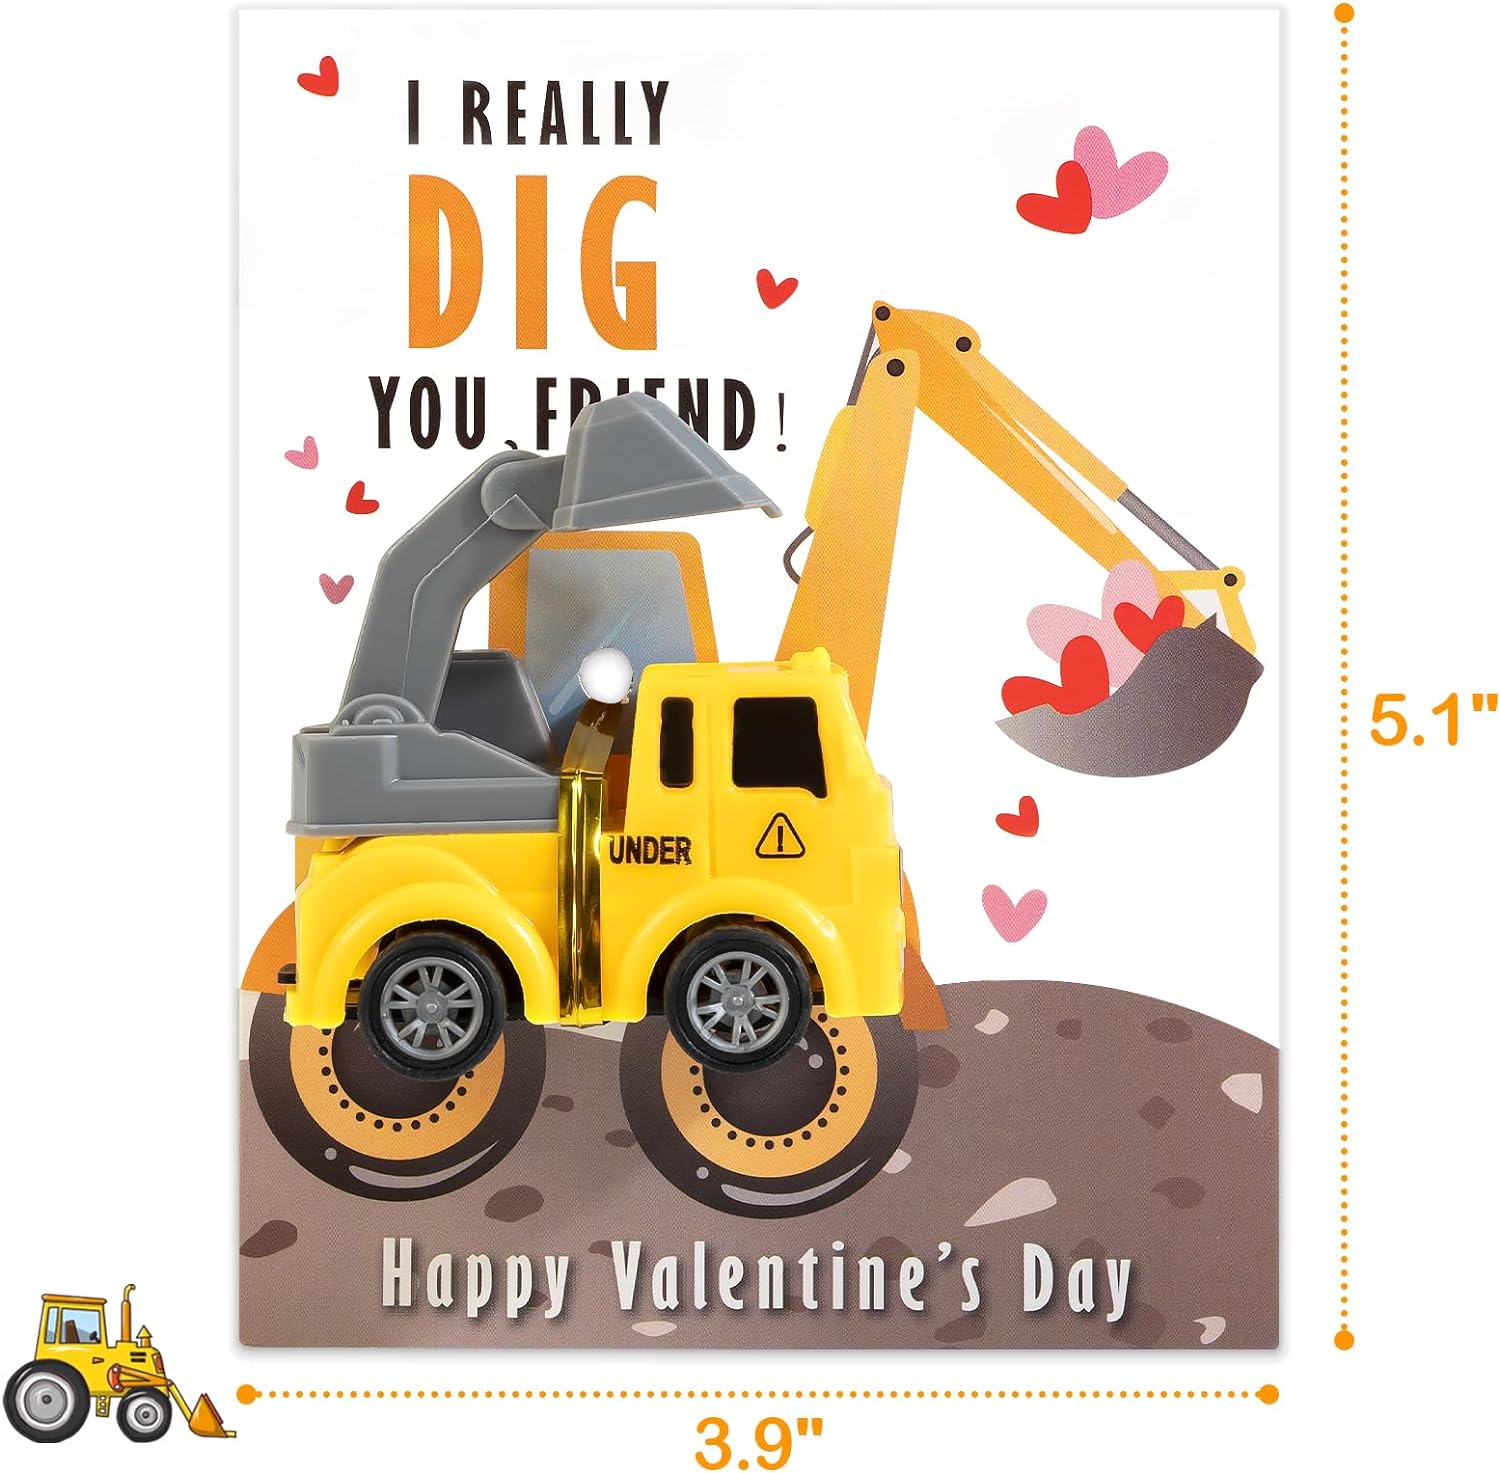 Valentines Cards for Kids Classroom - Valentines Day Gifts for Kids - 24 Construction Vehicles Toys Card Bulk